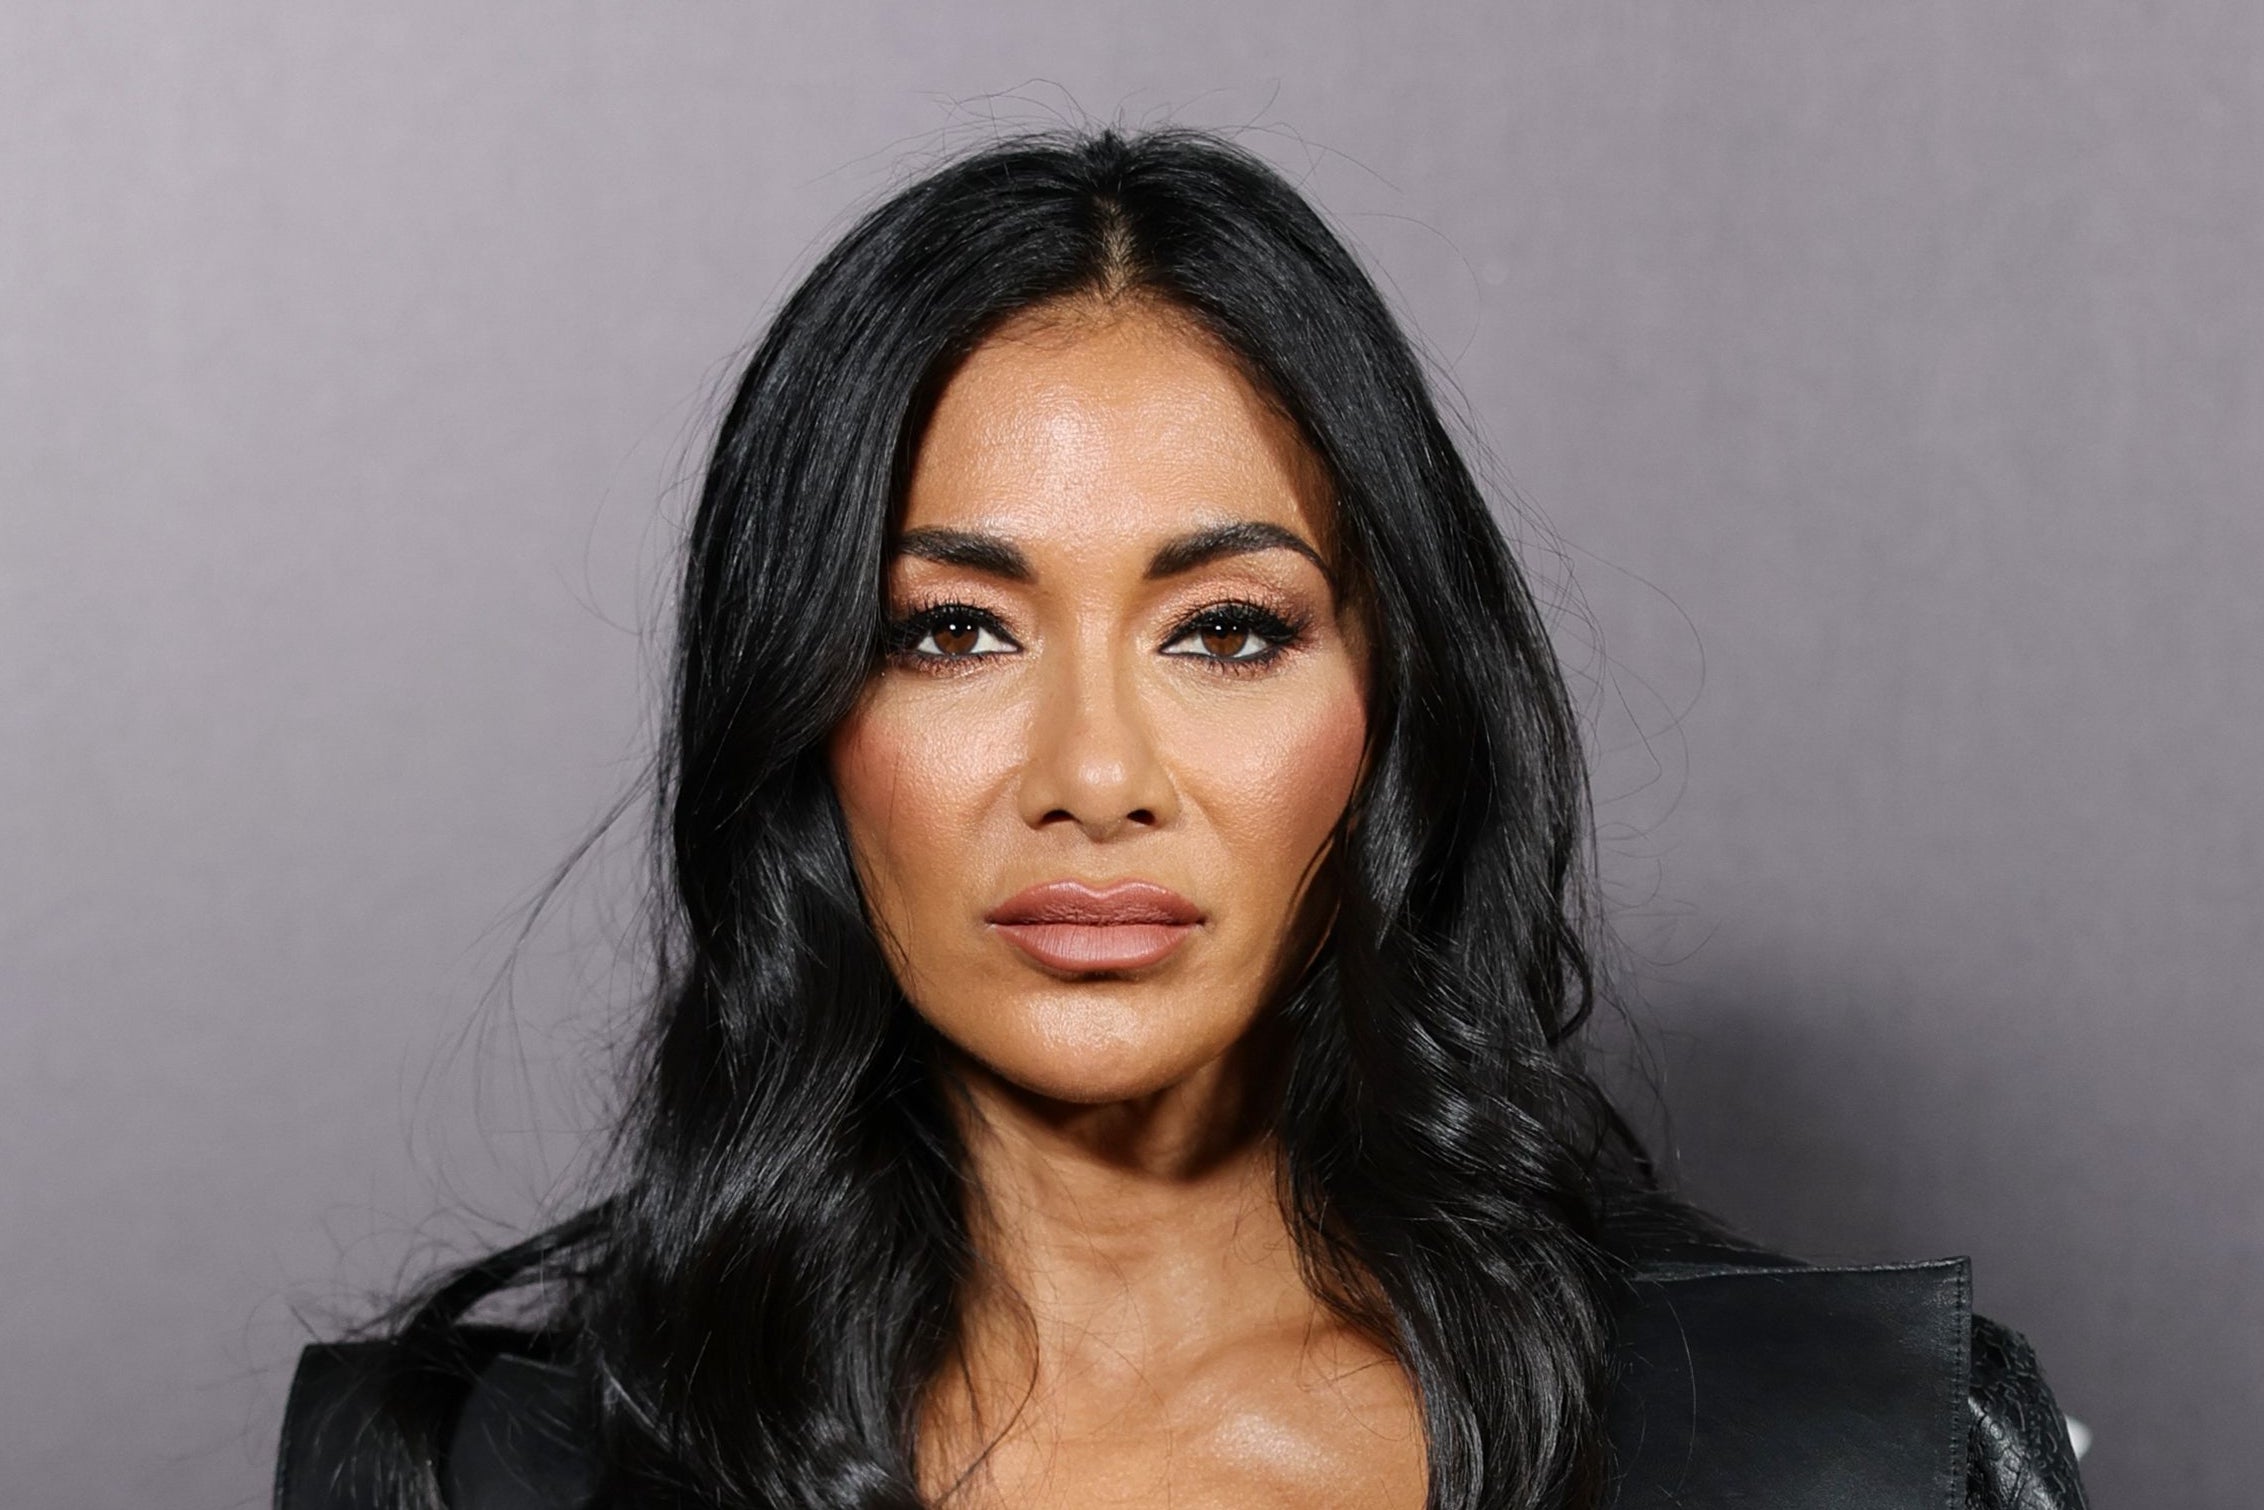 Scherzinger said the culture of work was ‘work them to the bone until they’re passed out’